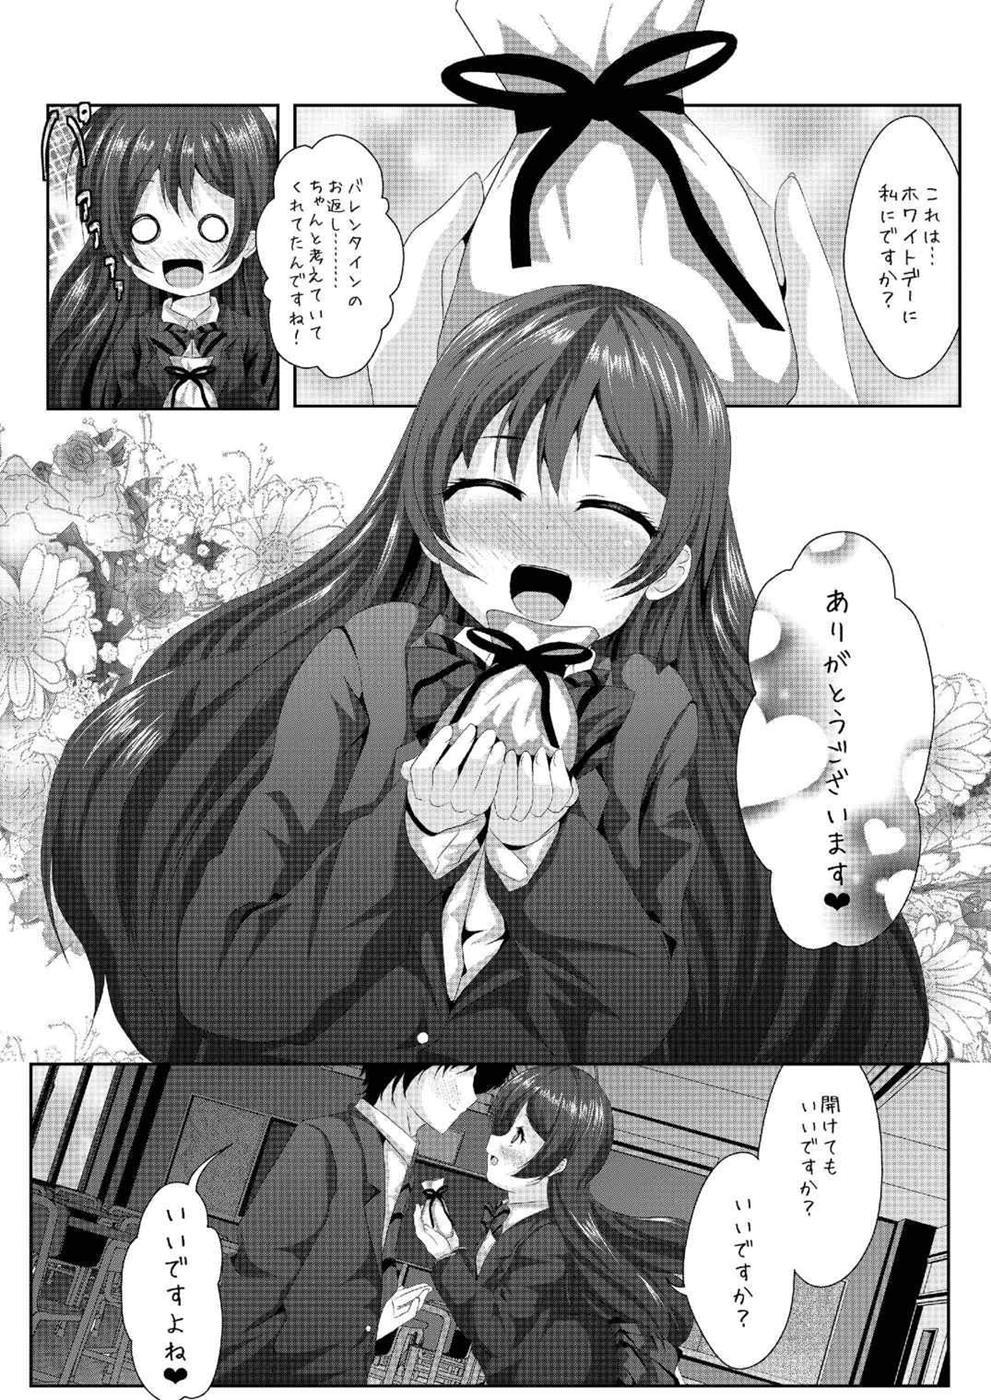 Small Boobs whiteday - Love live Aunty - Page 7